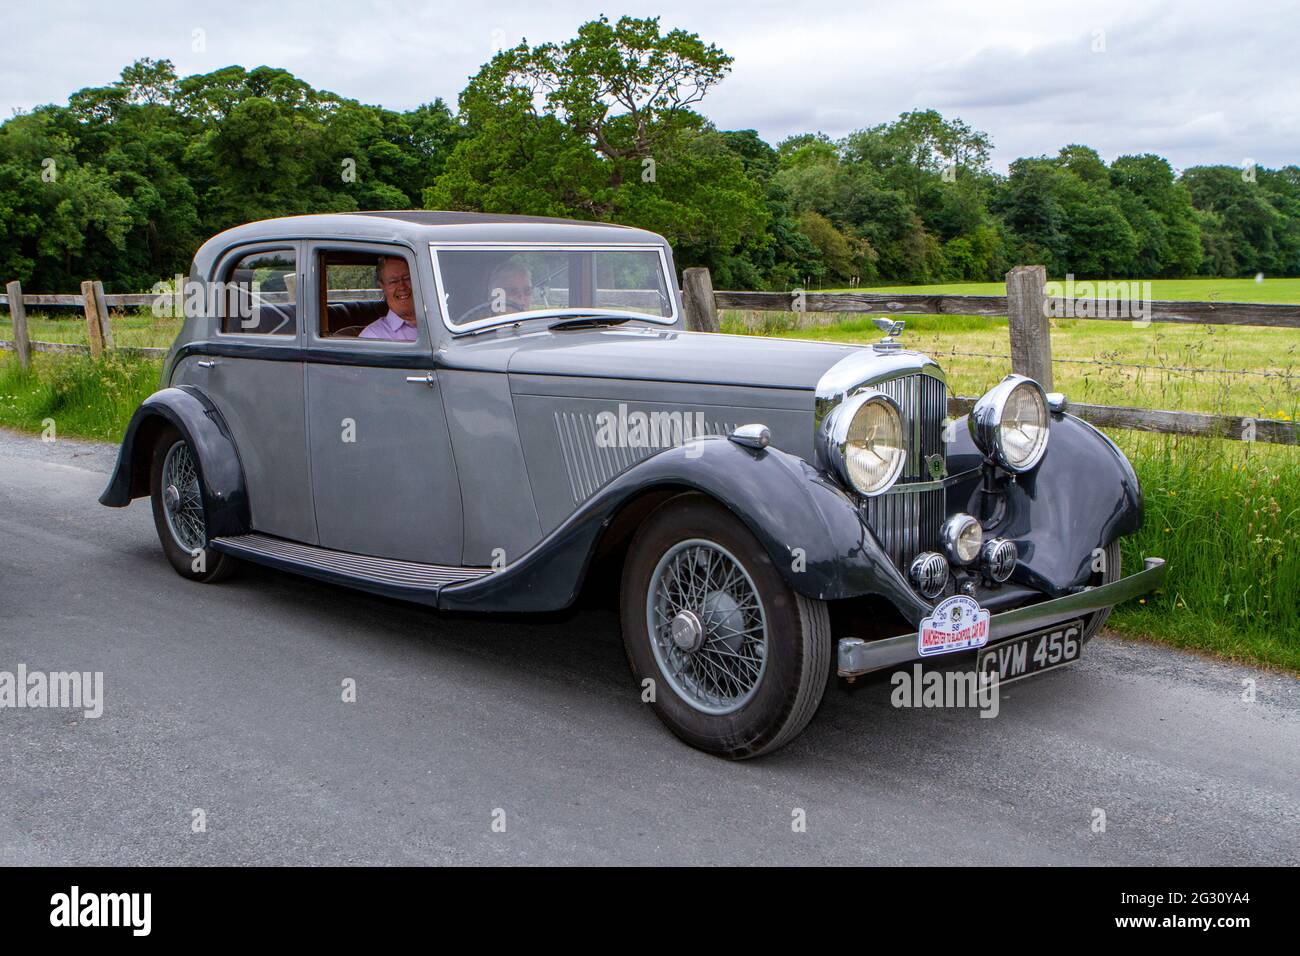 1936 30s pre-war grey Bentley 4257cc sedan at the 58th Annual Manchester to Blackpool Vintage & Classic Car Run The event is a ‘Touring Assembly’ Stock Photo